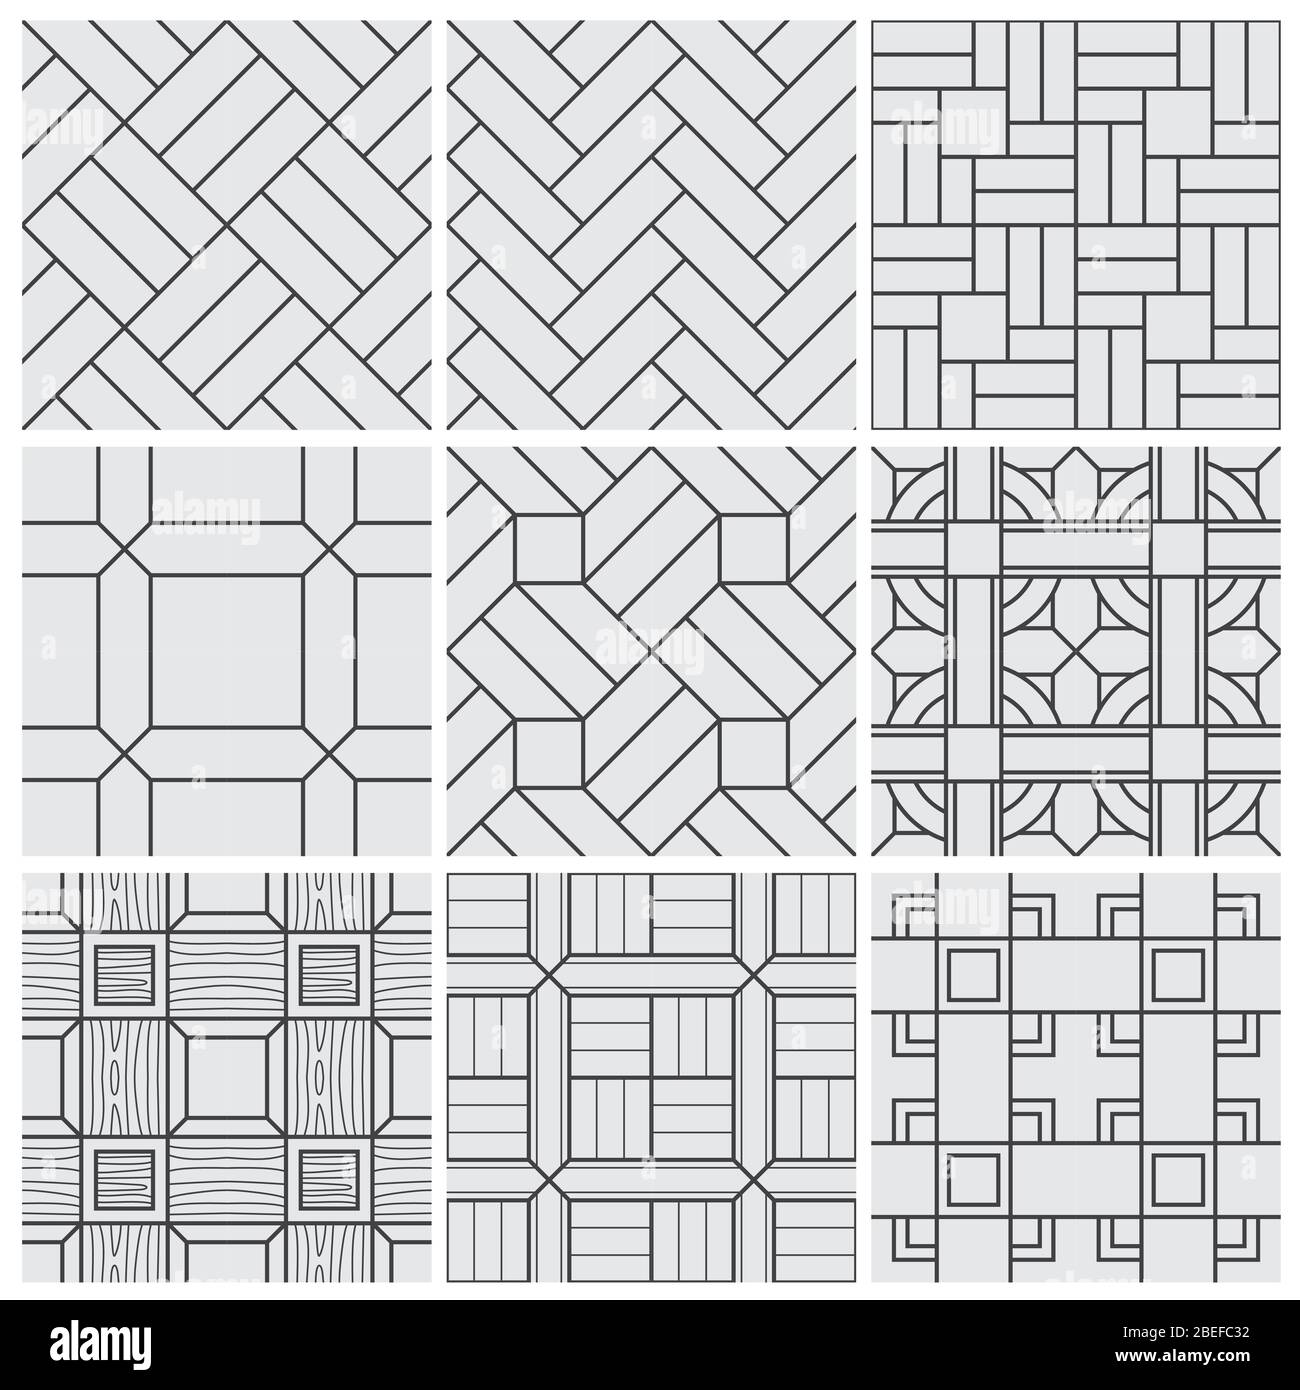 Floor material tiles vector seamless patterns. Material pattern seamless background, decoration geometric vintage tile illustration Stock Vector